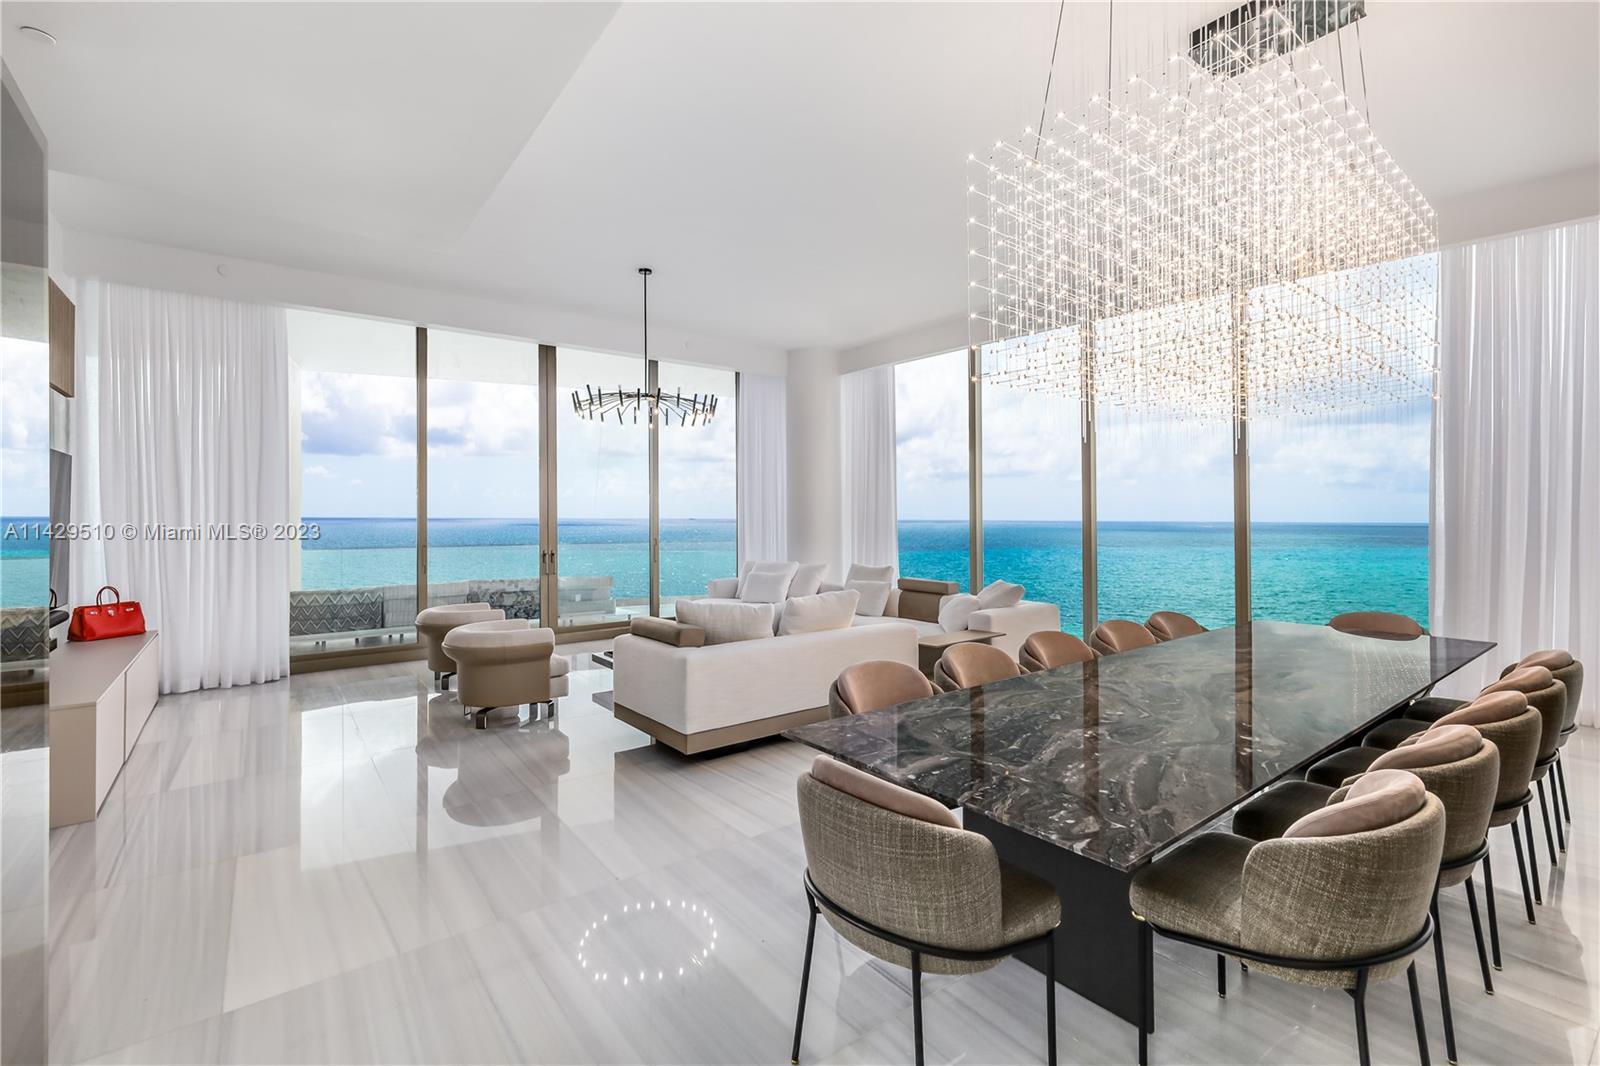 Estates at Acqualina: Spacious with over 5400 Sq.ft. built in 2022 is the ultimate in Luxury Living.